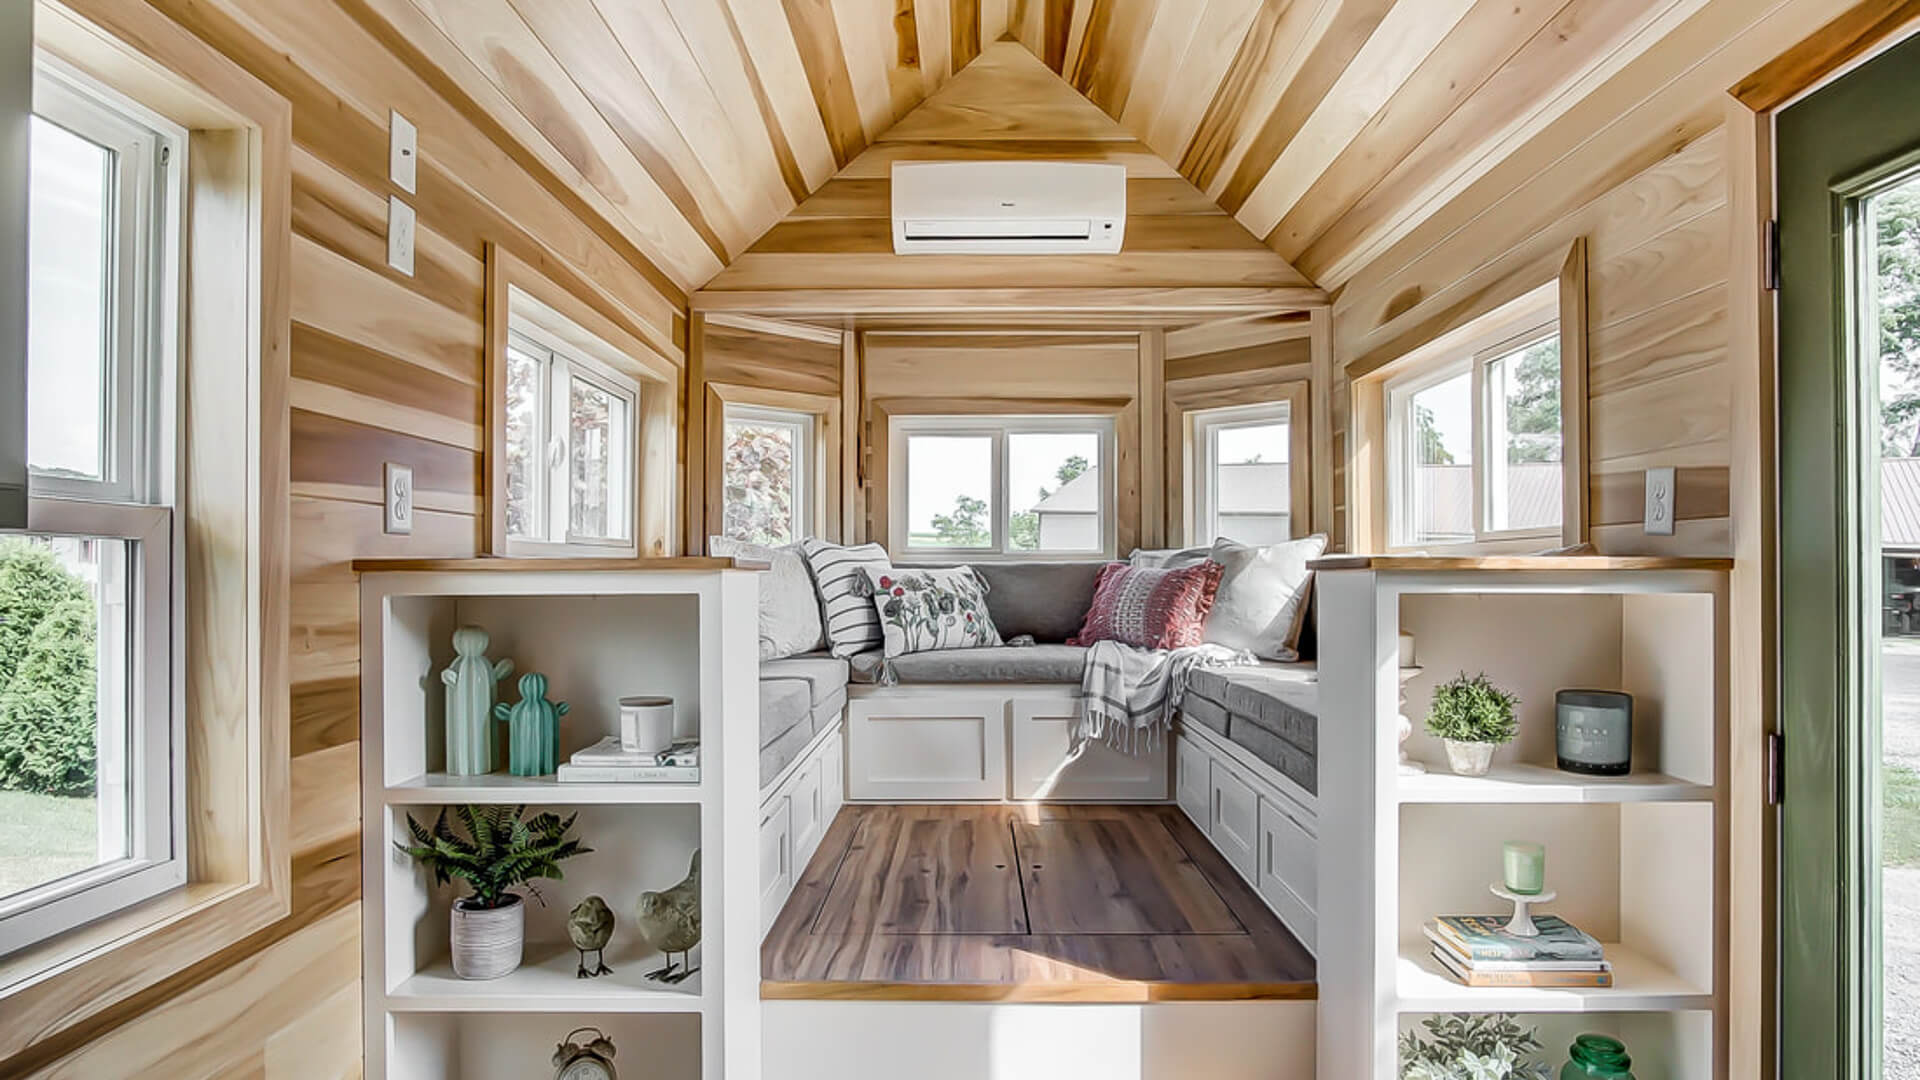 https://www.arch2o.com/wp-content/uploads/2023/04/Arch2O-25-creative-tiny-house-storage-ideas-for-your-little-retreat-8.jpg